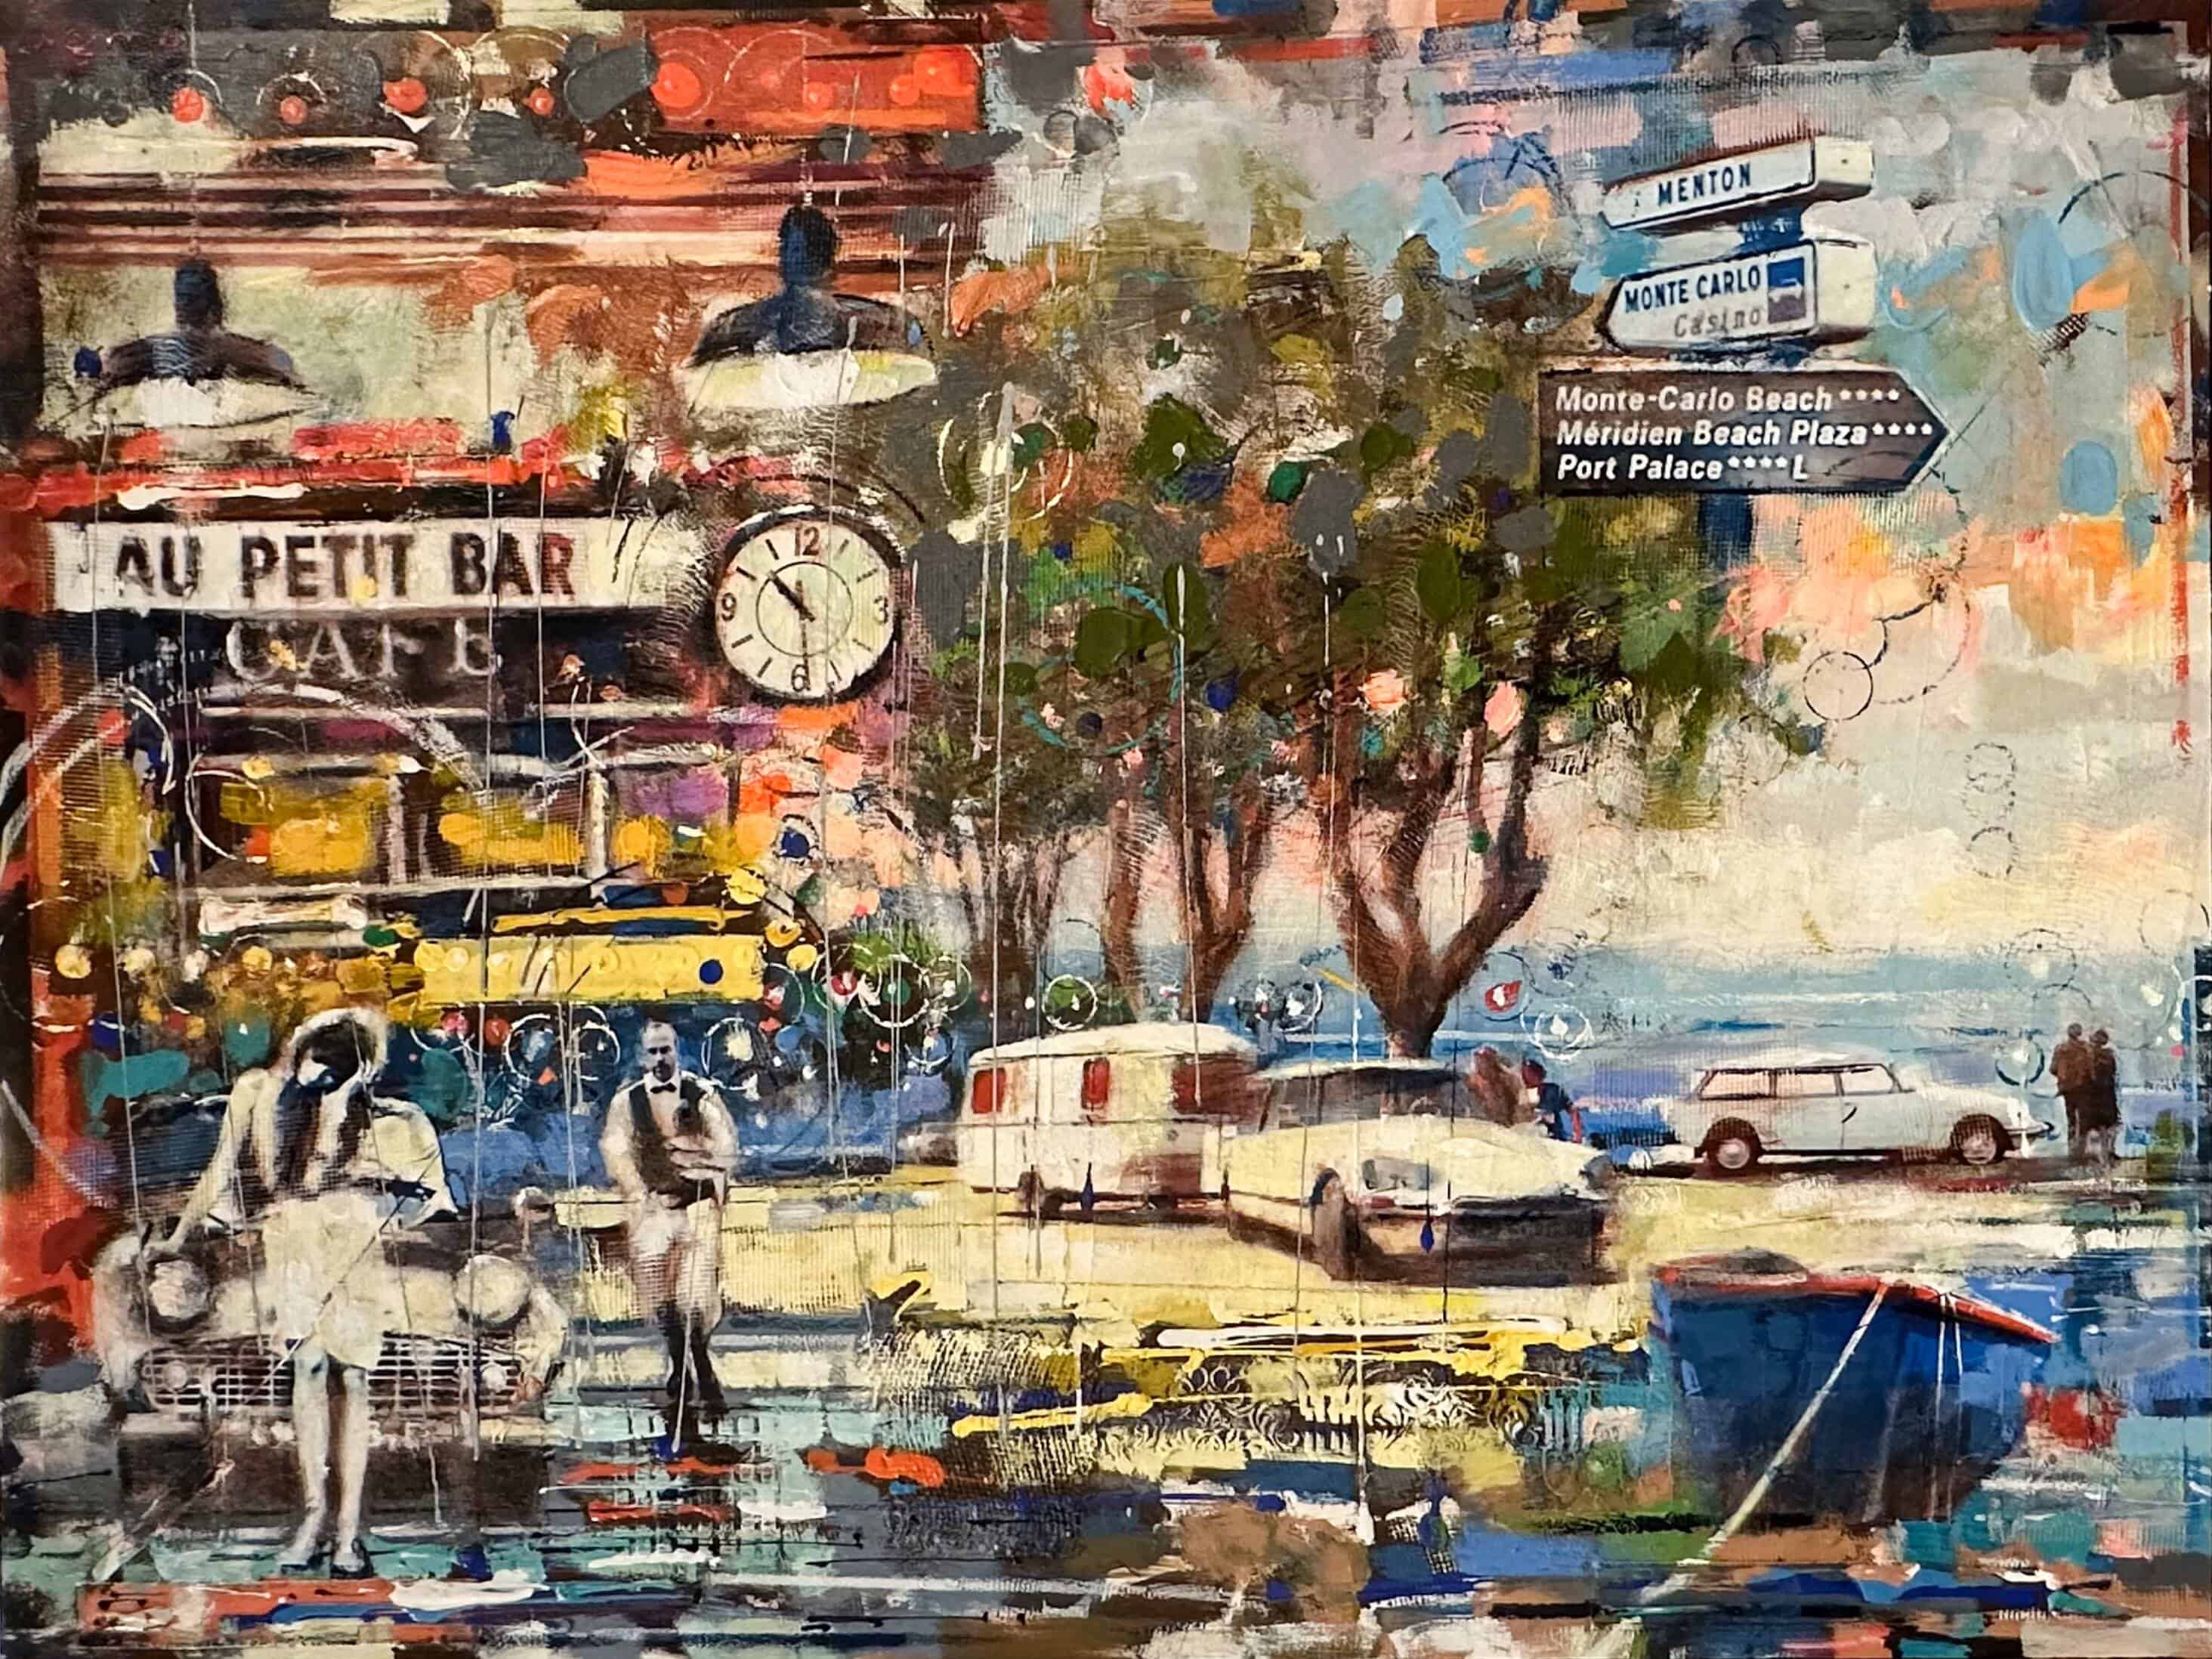 Contemporary art. Title: At Petit Bar Cafe at 10:29 PM, 36 x 48 in, Mixed Media on canvas by Canadian artist Victor Nemo.